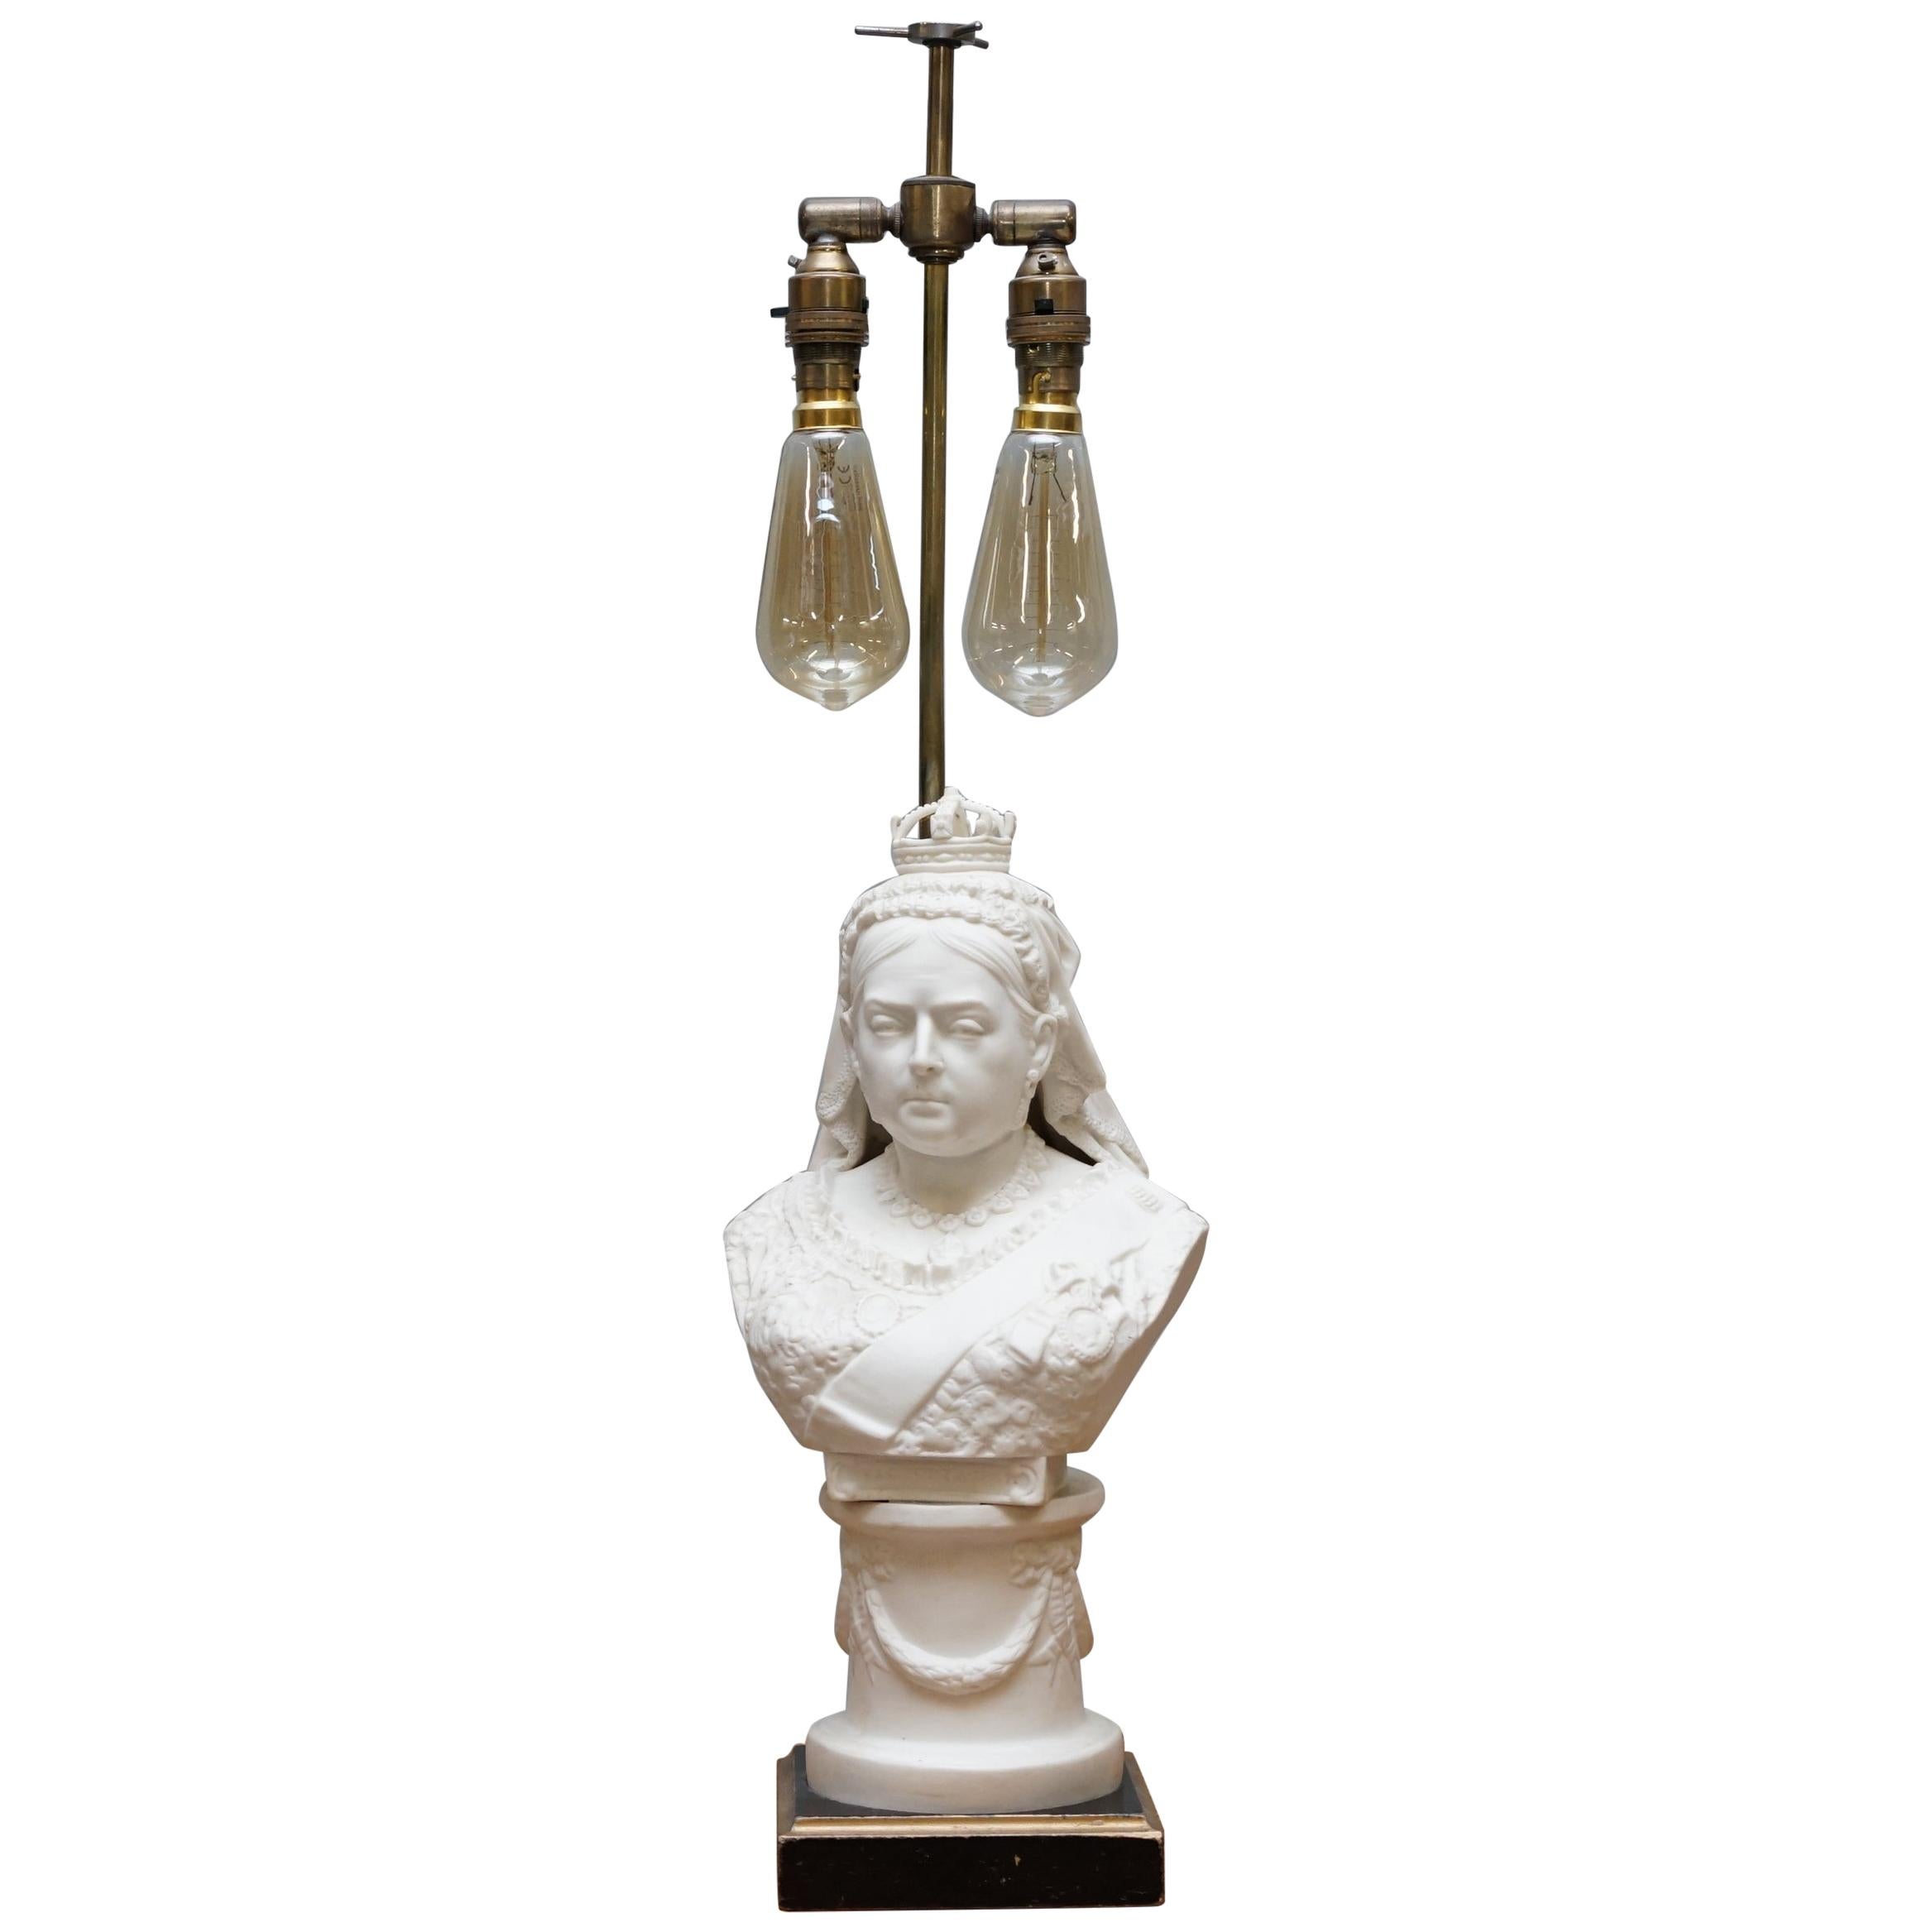 Good 19th Century Parian Figure of Queen Victoria Bust Made into a Table Lamp